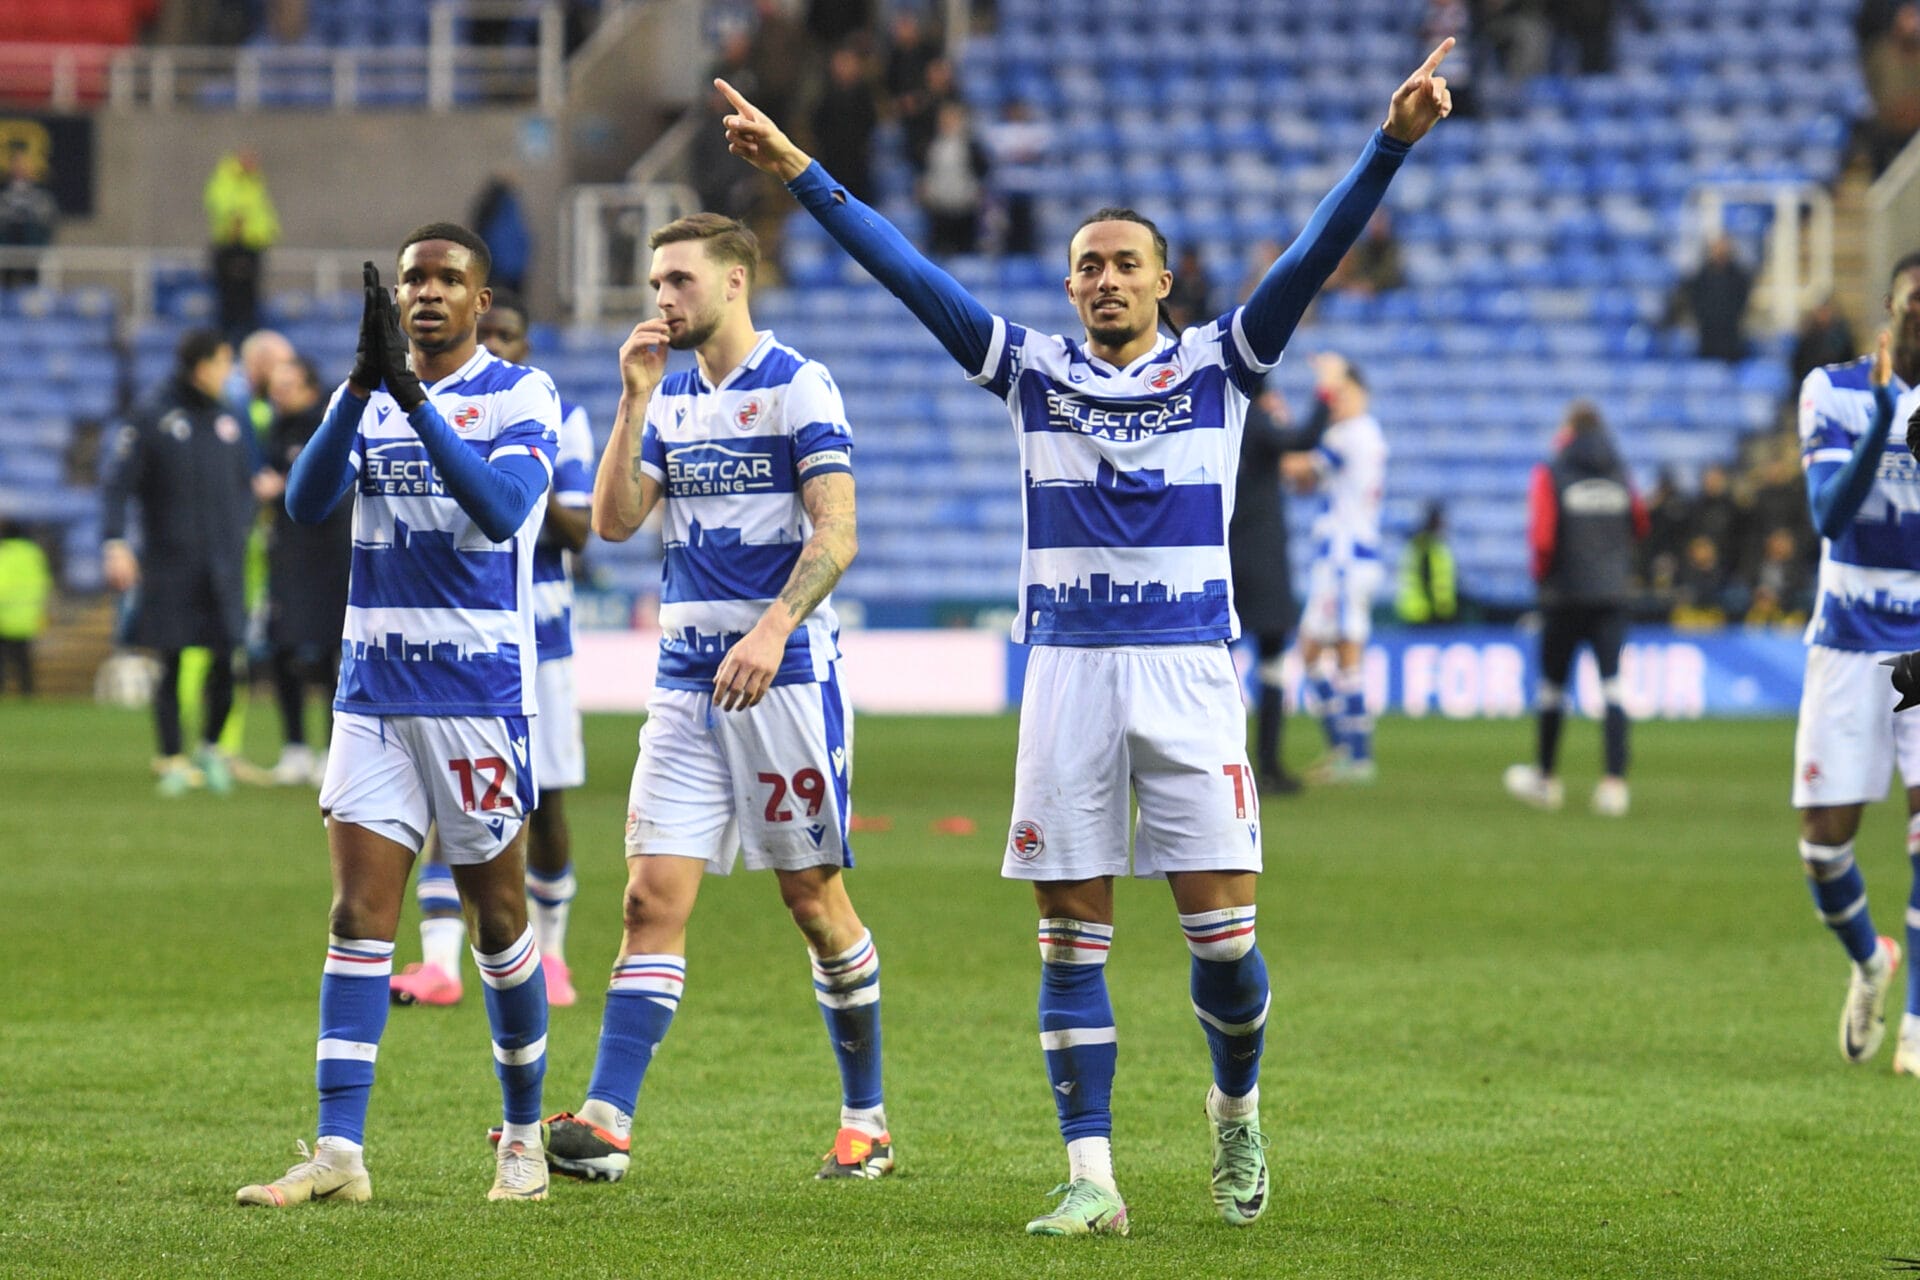 Azeez magic sees Reading climb League One table – Reading Today Online